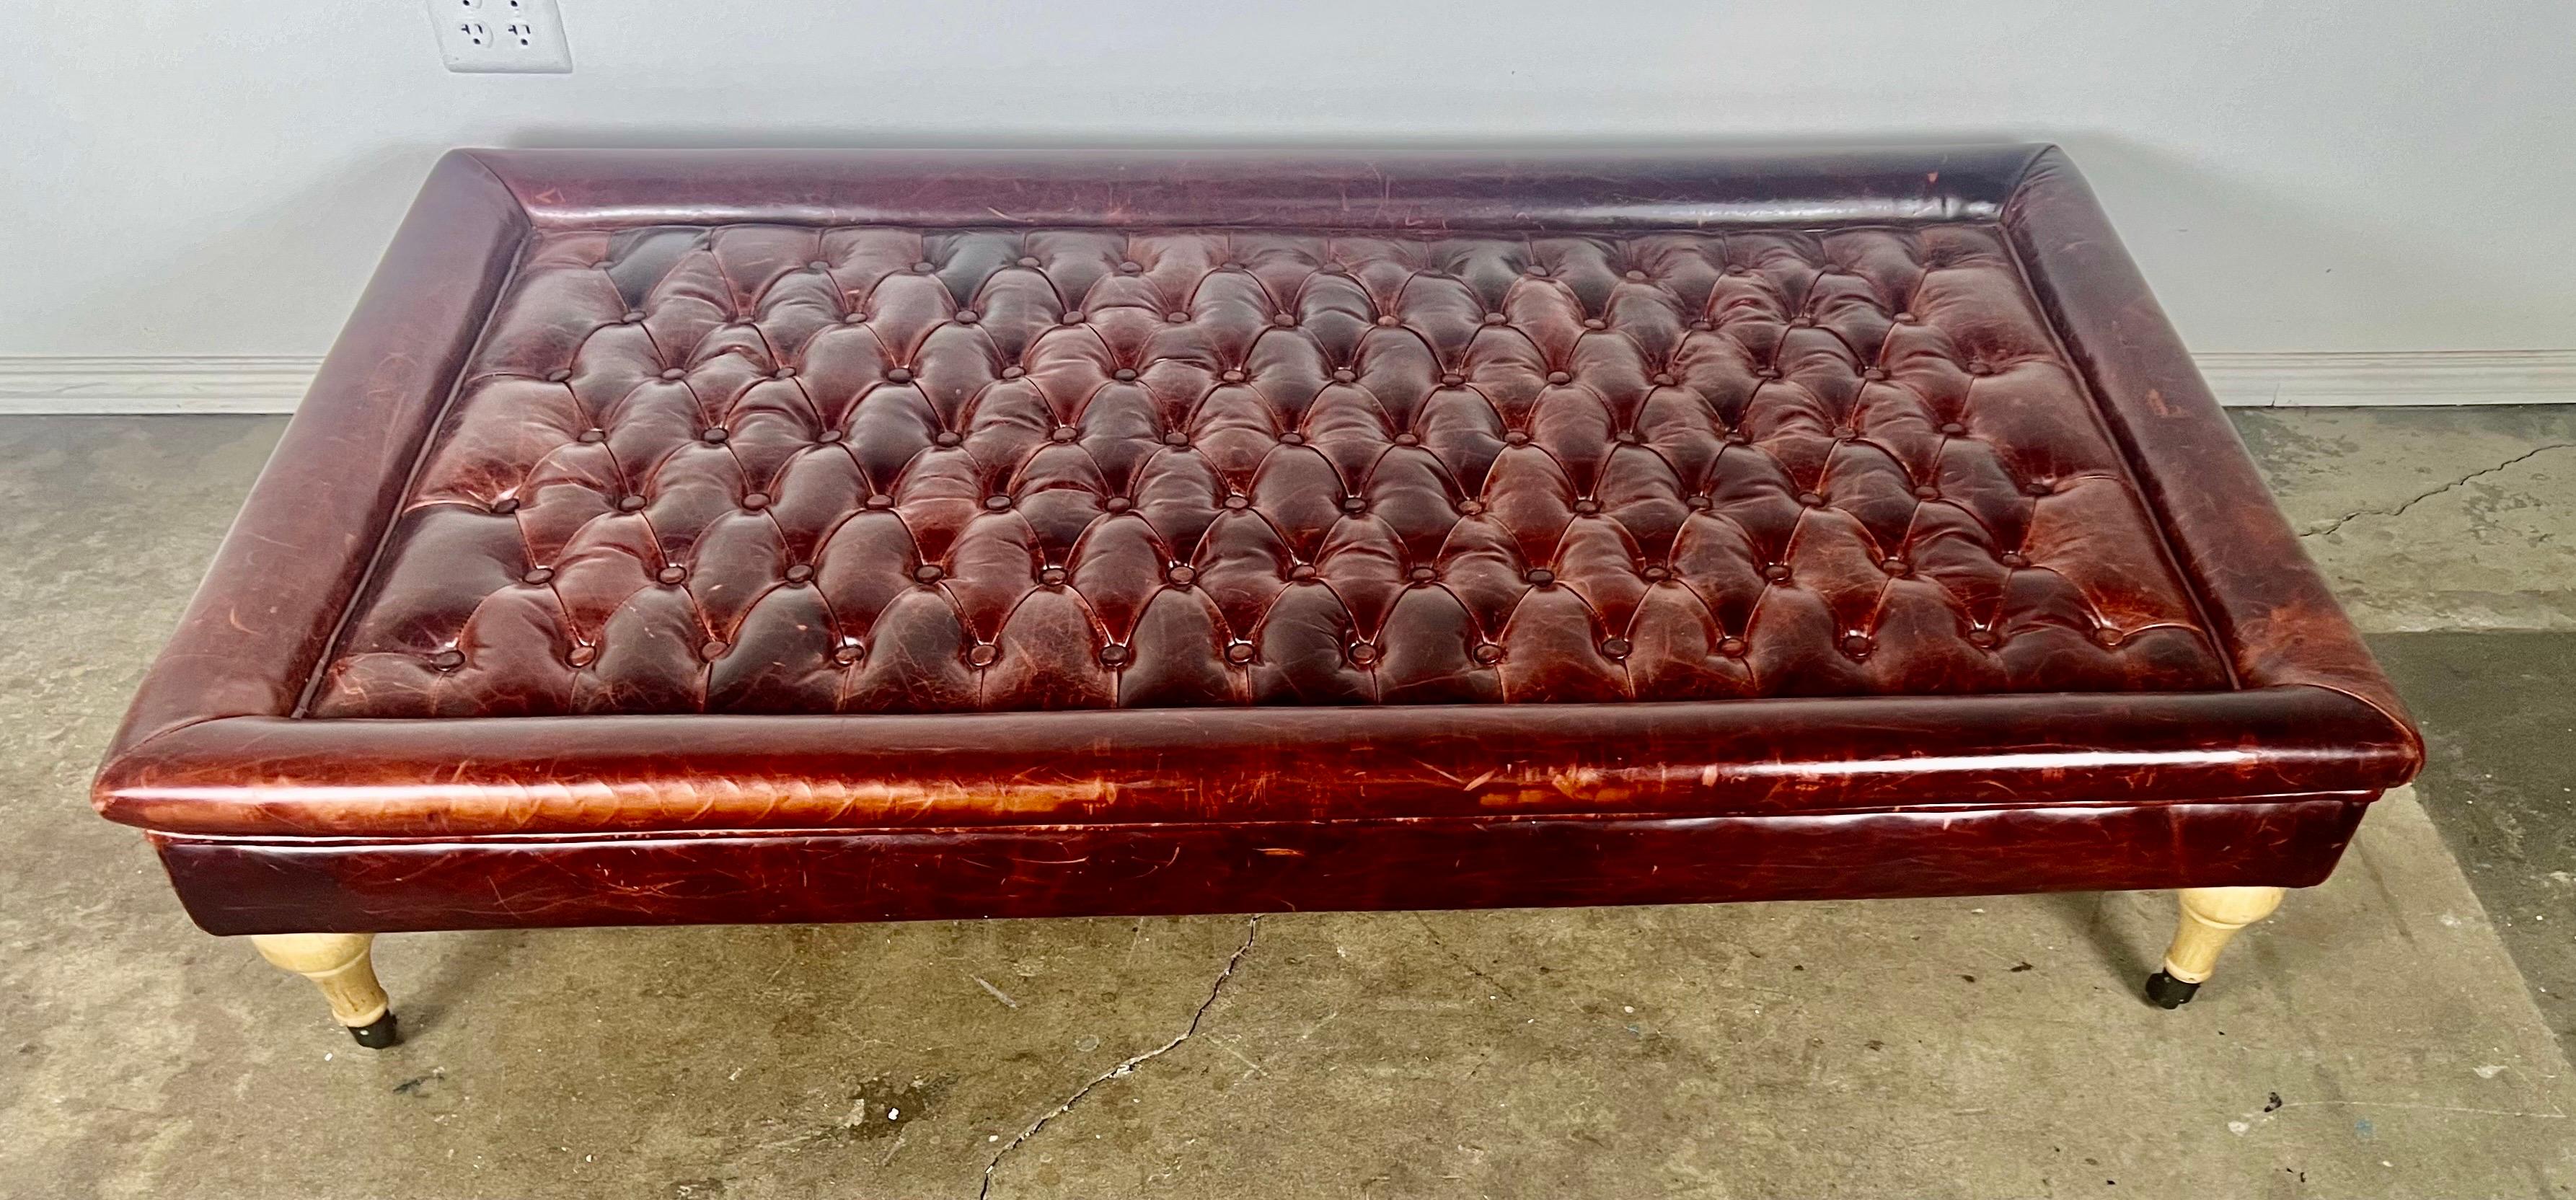 Monumental scale Chesterfield style leather tufted ottoman.  It stands  on four oak legs with original casters.  The leather is in great condition and is beautifully distressed, adding character and warmth to the unique piece.